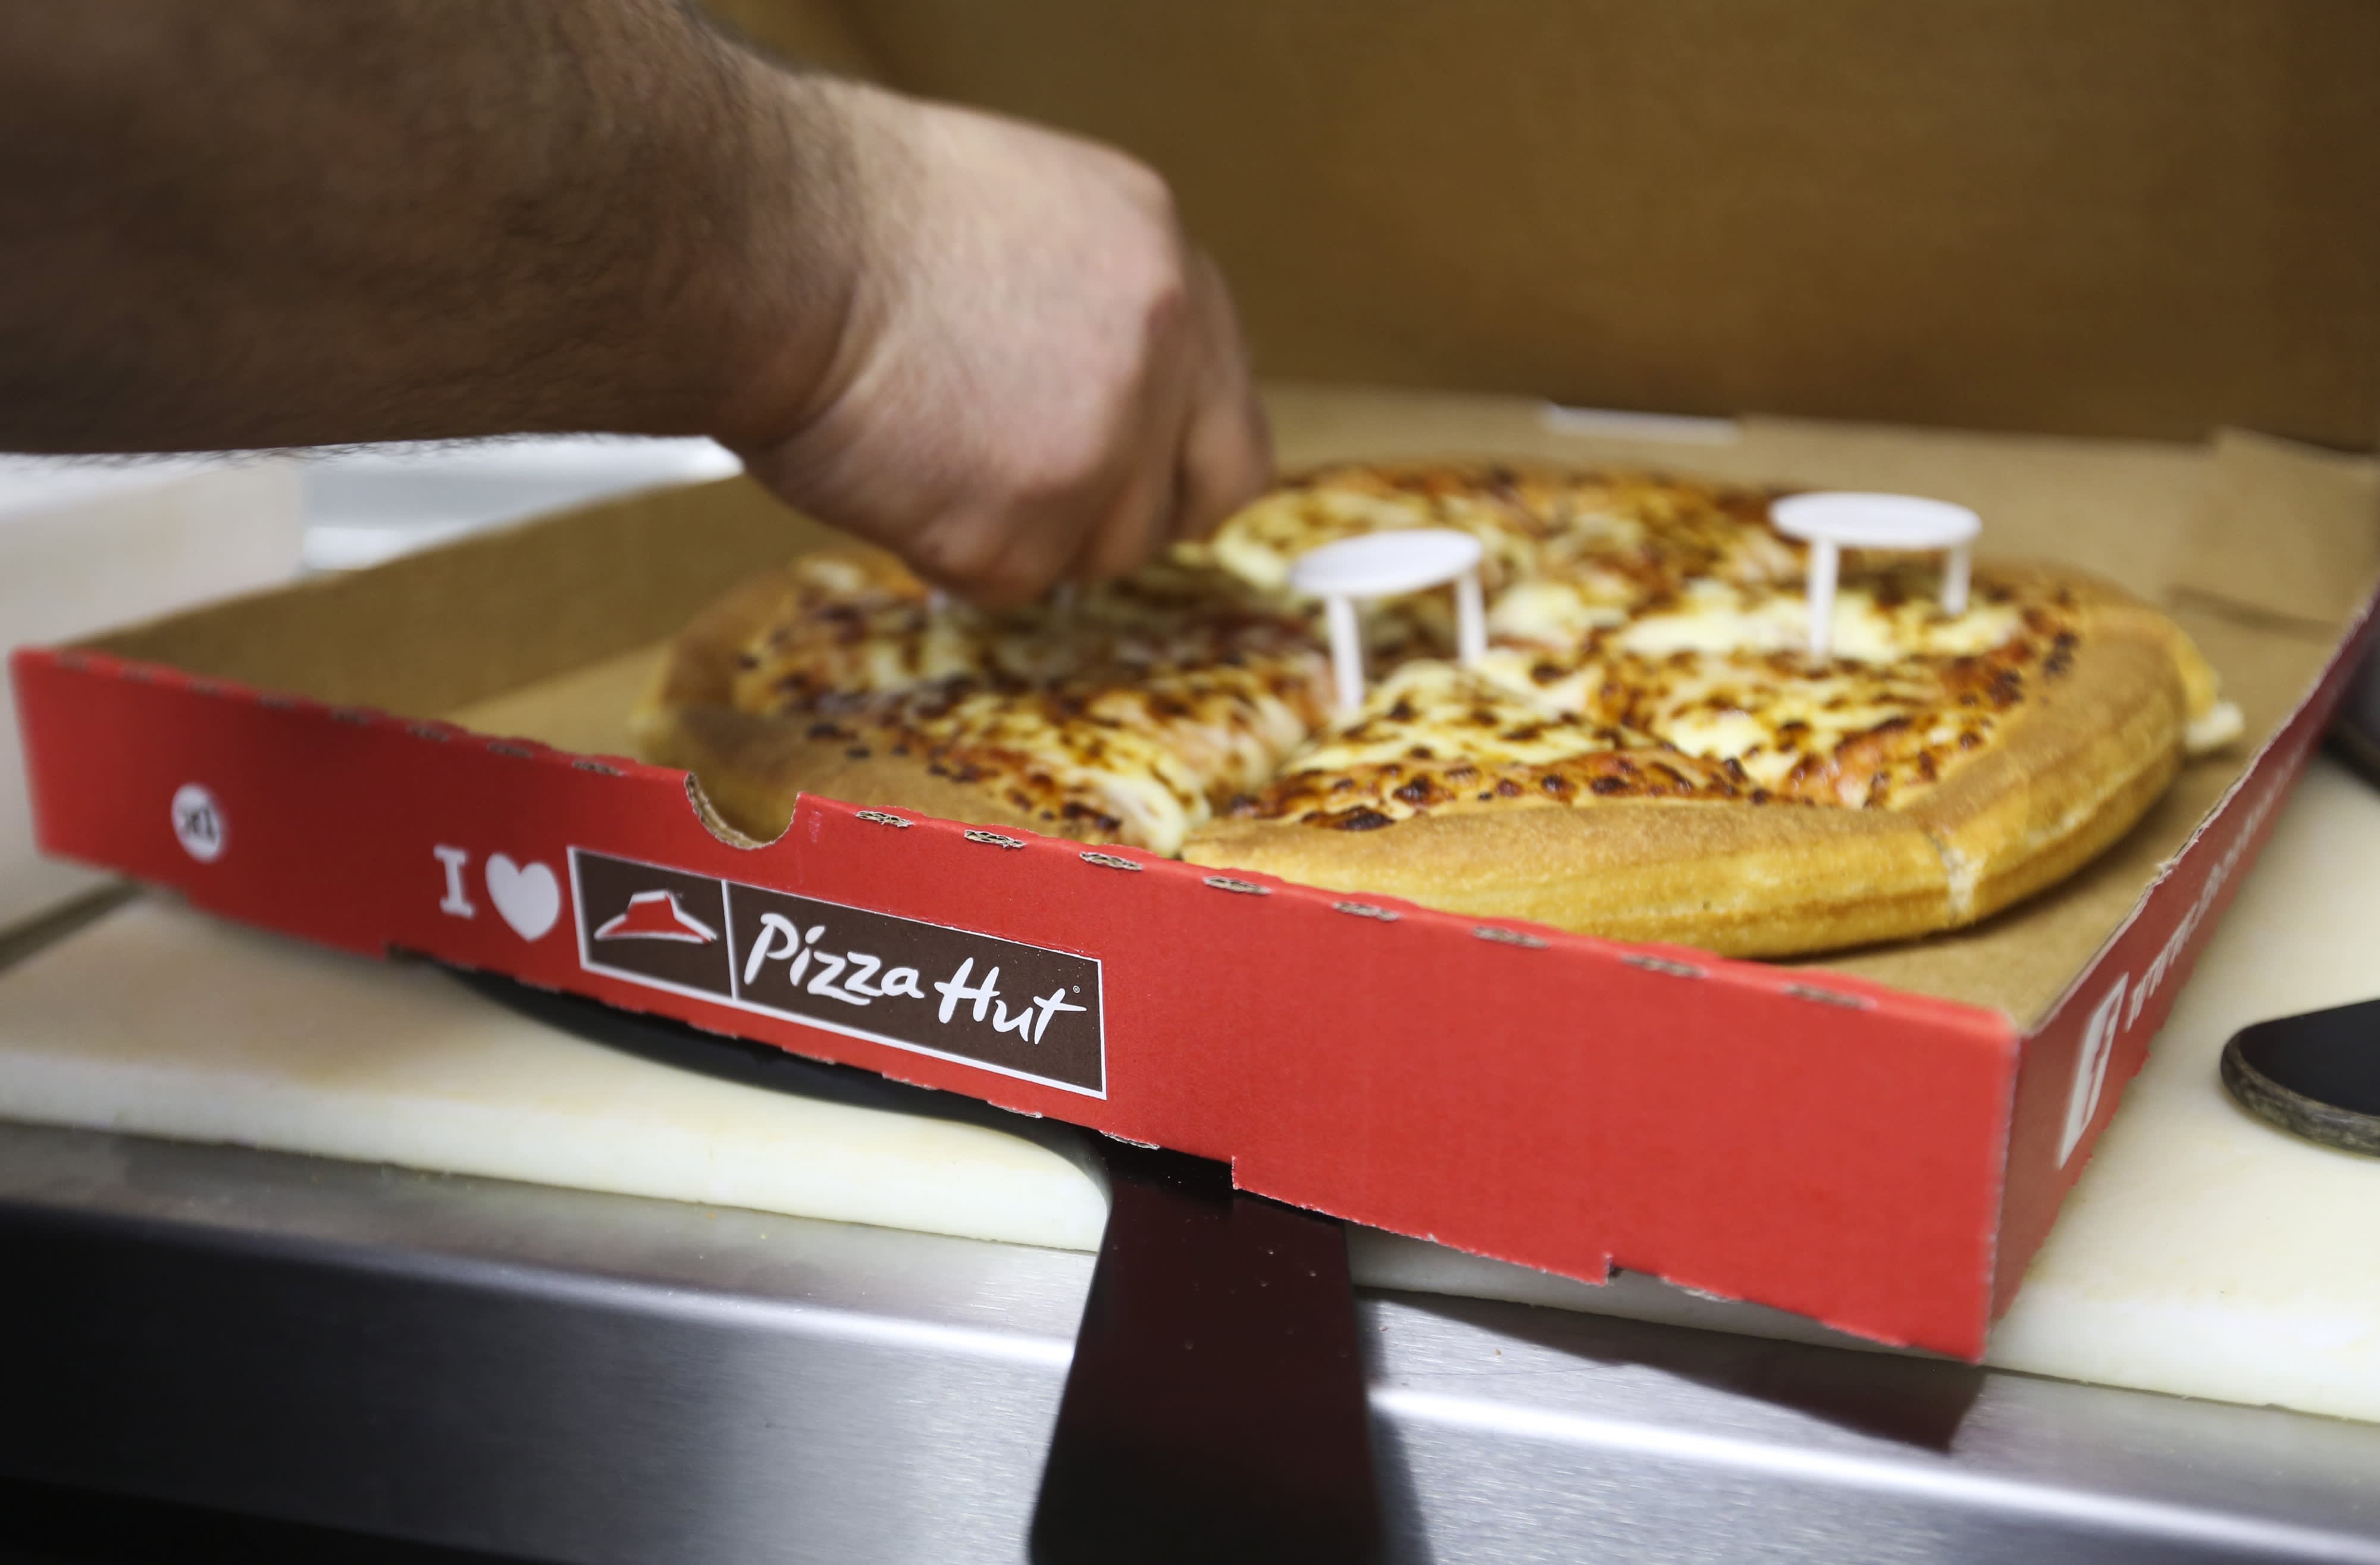 Pizza Hut Triple Treat Box is Back! So What's the Big Deal? (We'll